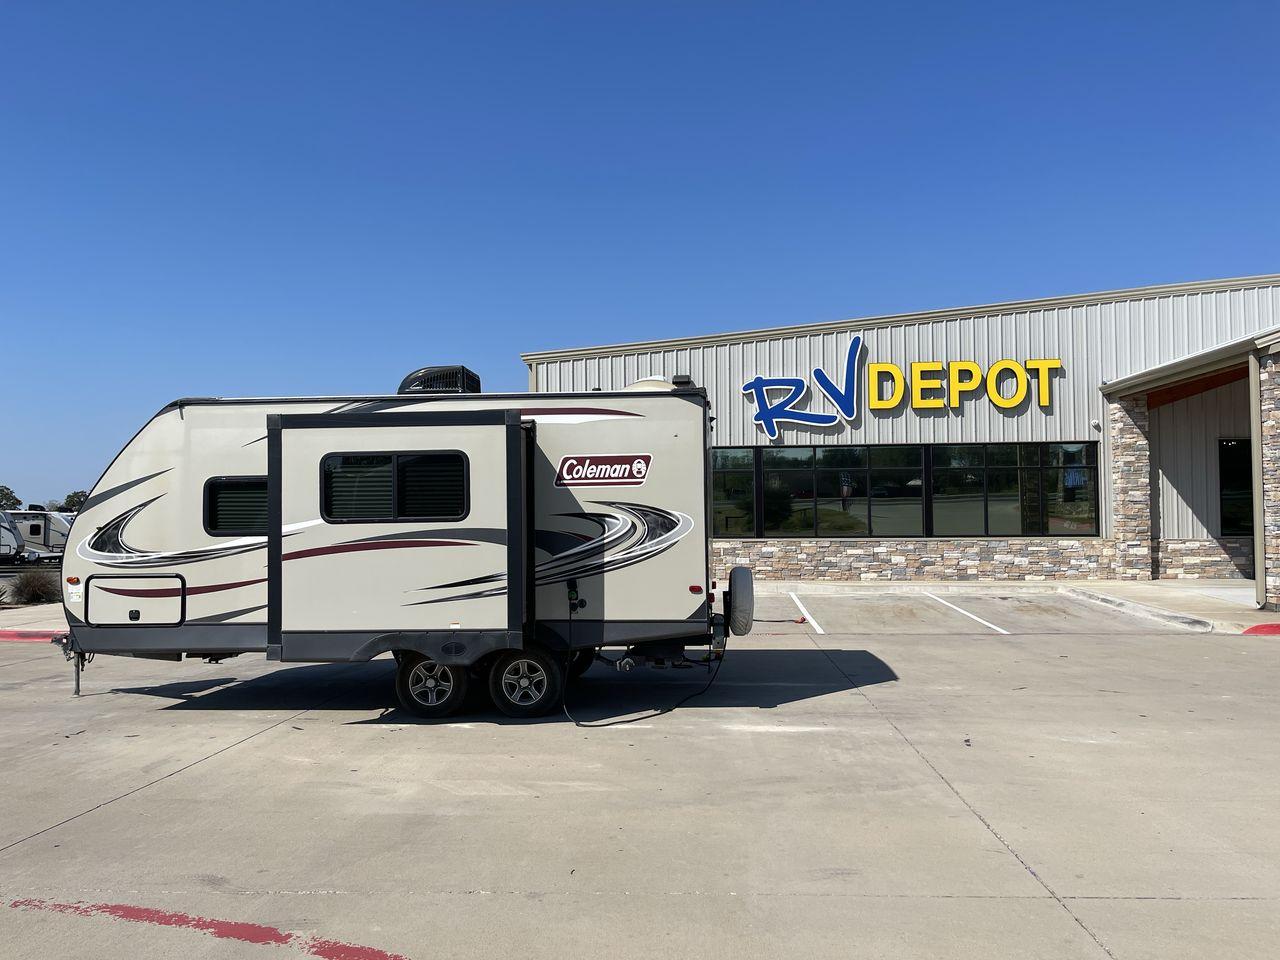 2020 KEYSTONE COLEMAN 1805RB (4YDT18029LM) , Length: 22.75 ft | Dry Weight: 4,448 lbs. | Slides: 1 transmission, located at 4319 N Main Street, Cleburne, TX, 76033, (817) 221-0660, 32.435829, -97.384178 - The 2020 Dutchmen Coleman 1805RB is a compact and lightweight travel trailer perfect for adventurers who value versatility and comfort during their travels. This trailer is ideal for both weekend getaways and extended trips, thanks to its manageable length of 22.75 feet and lightweight dry weight of - Photo #21